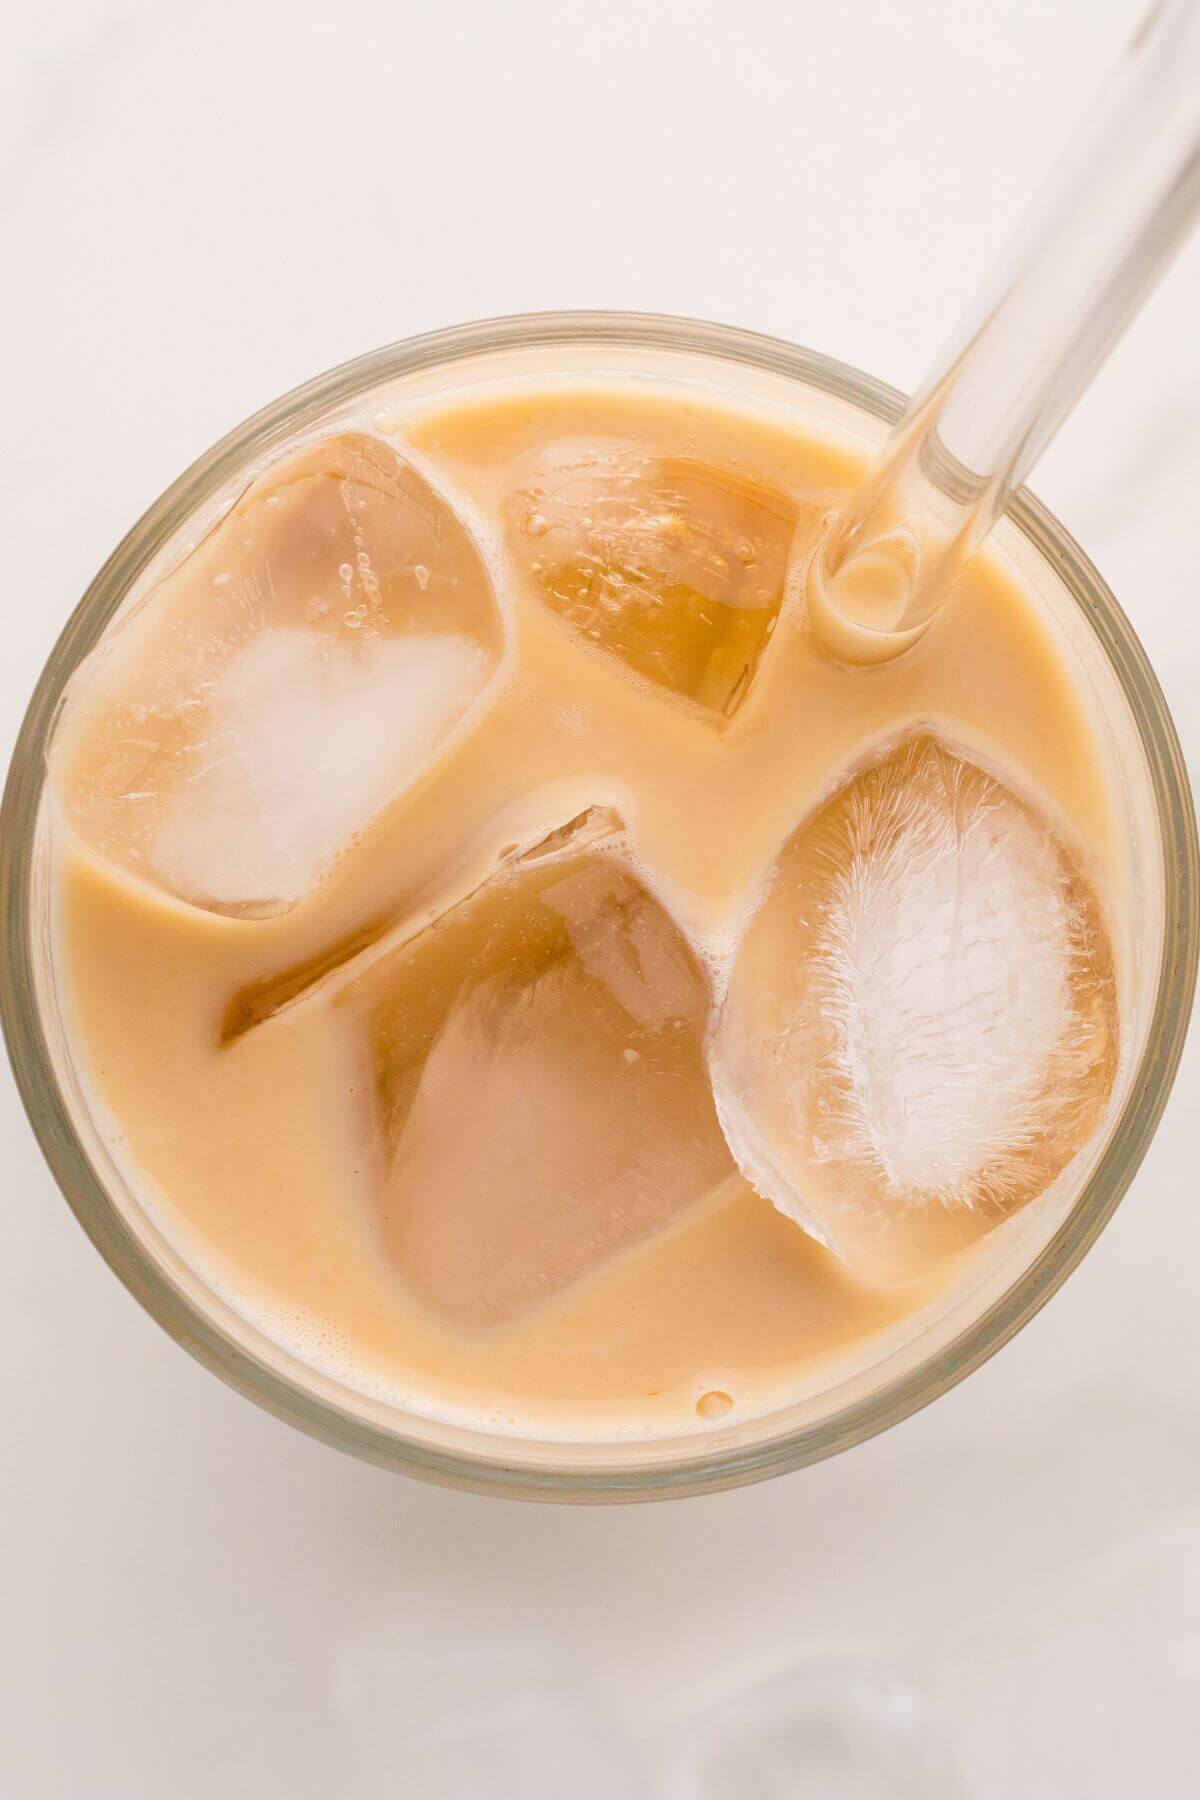 The top of a glass with the straw pointed to the top right corner shows creamy chai drink and ice.